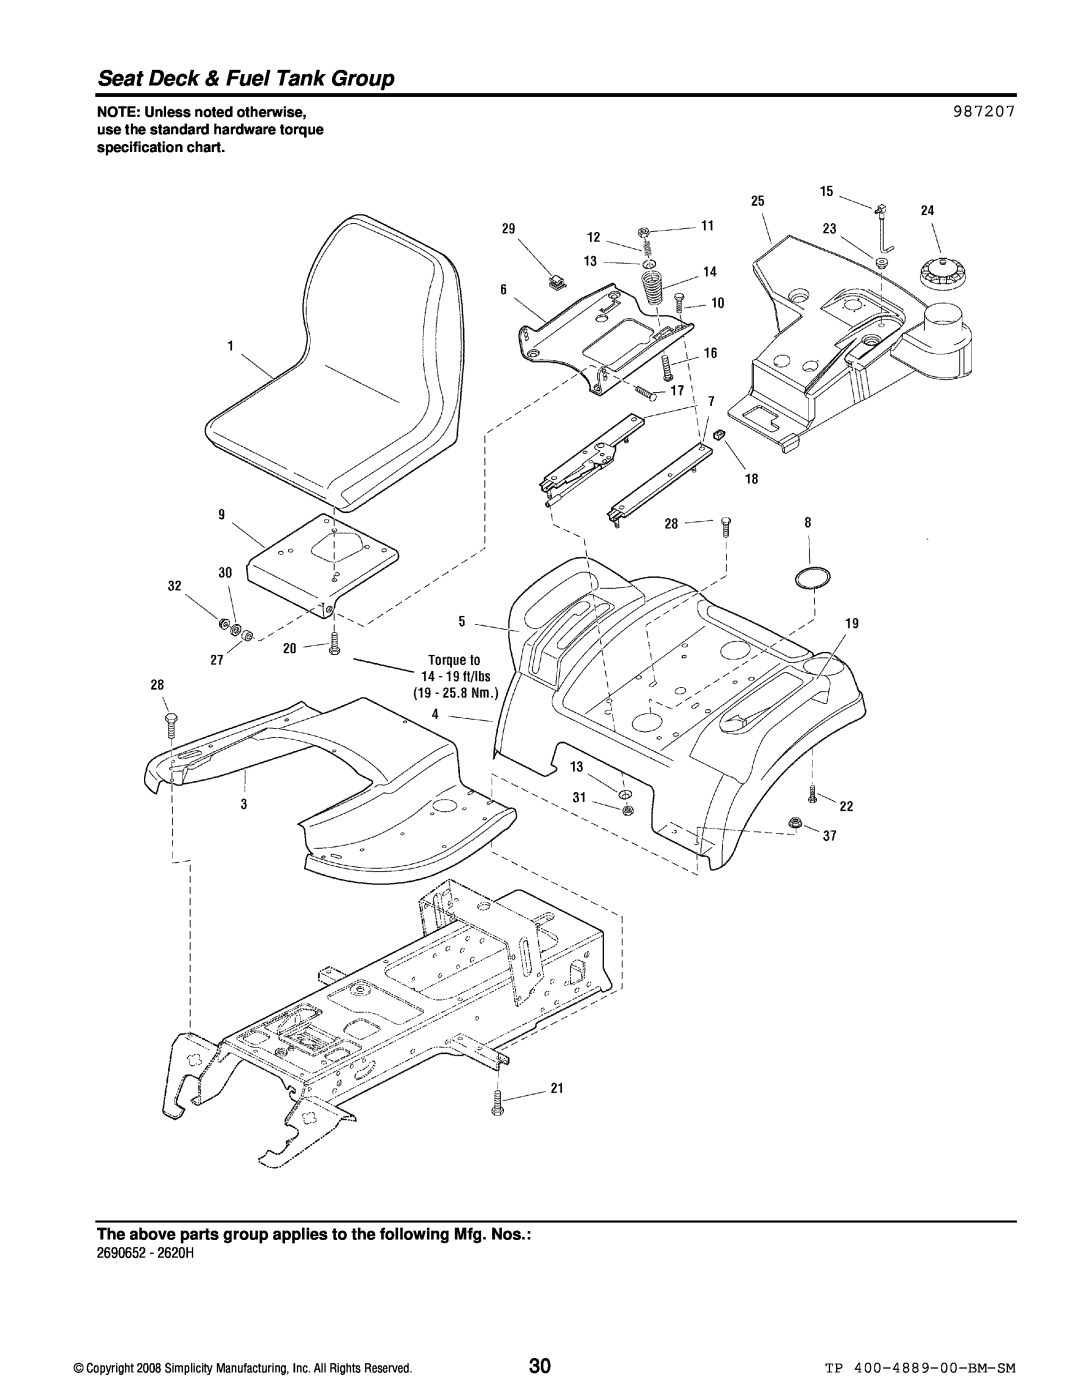 Simplicity 2600 Series manual Seat Deck & Fuel Tank Group, 987207, TP 400-4889-00-BM-SM, NOTE: Unless noted otherwise 